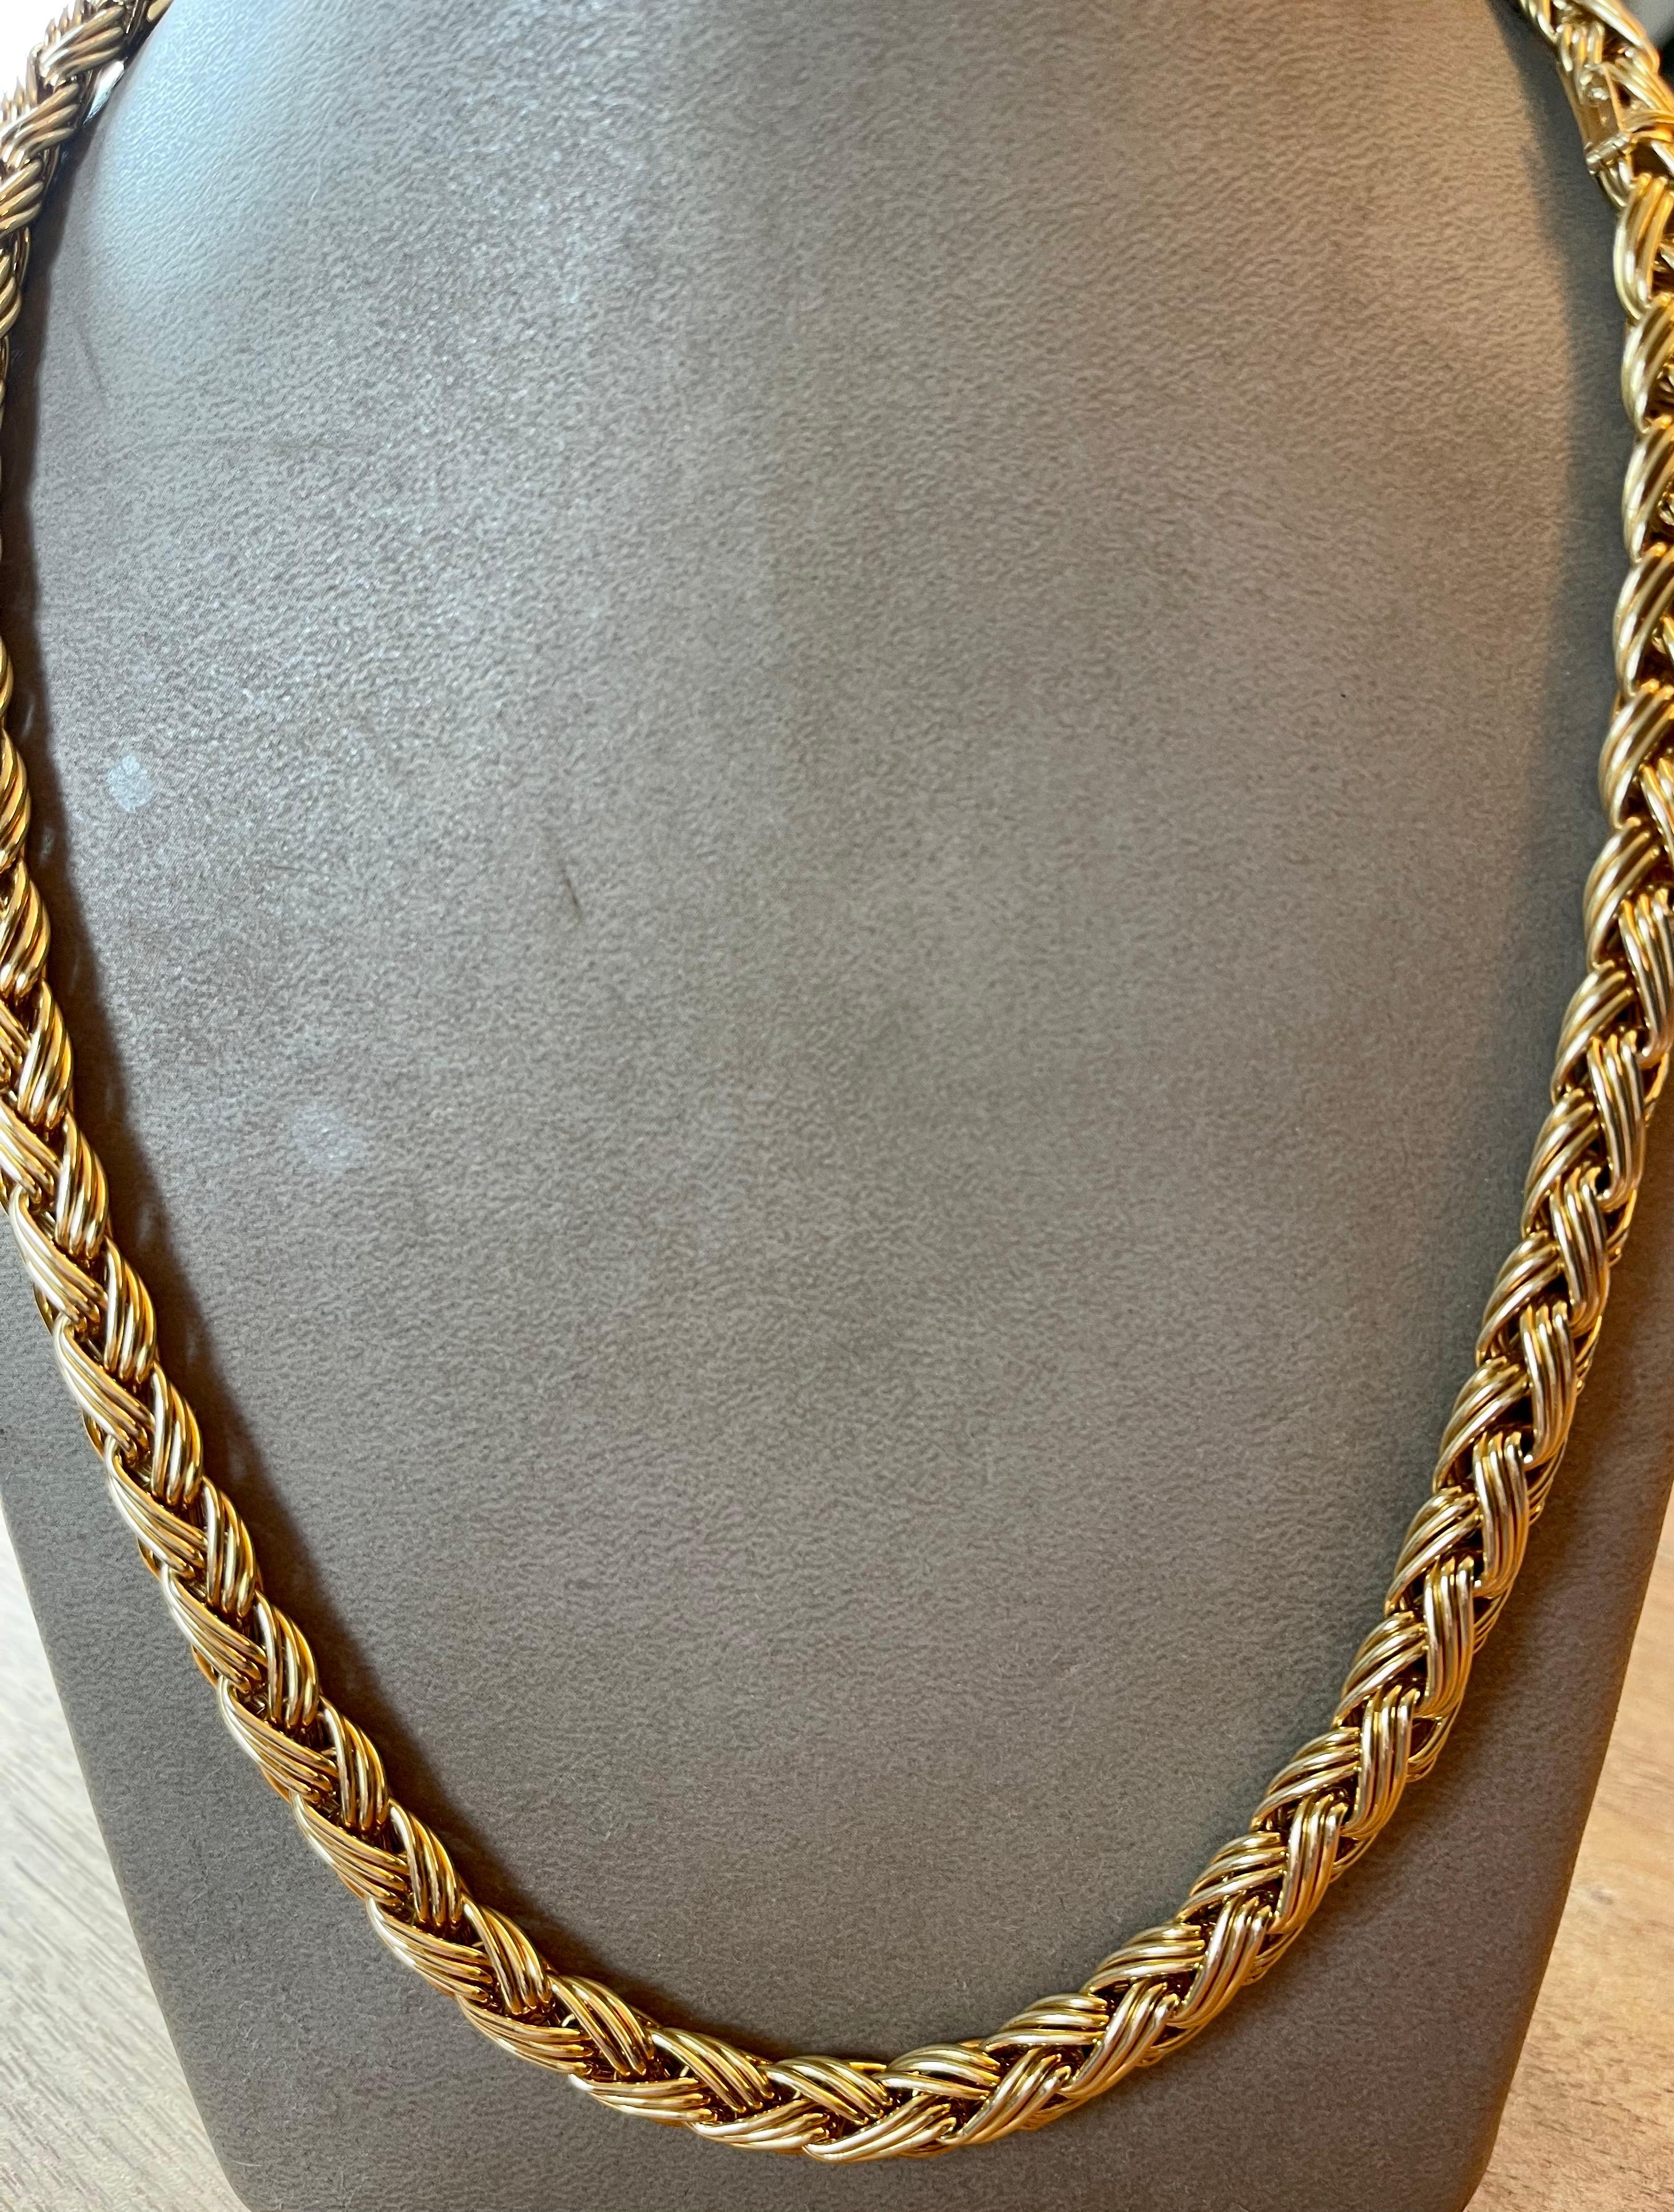 Vintage 18 K Yellow Gold Cable Knit Neckalce and Bracelet Signed Meister Zurich For Sale 9